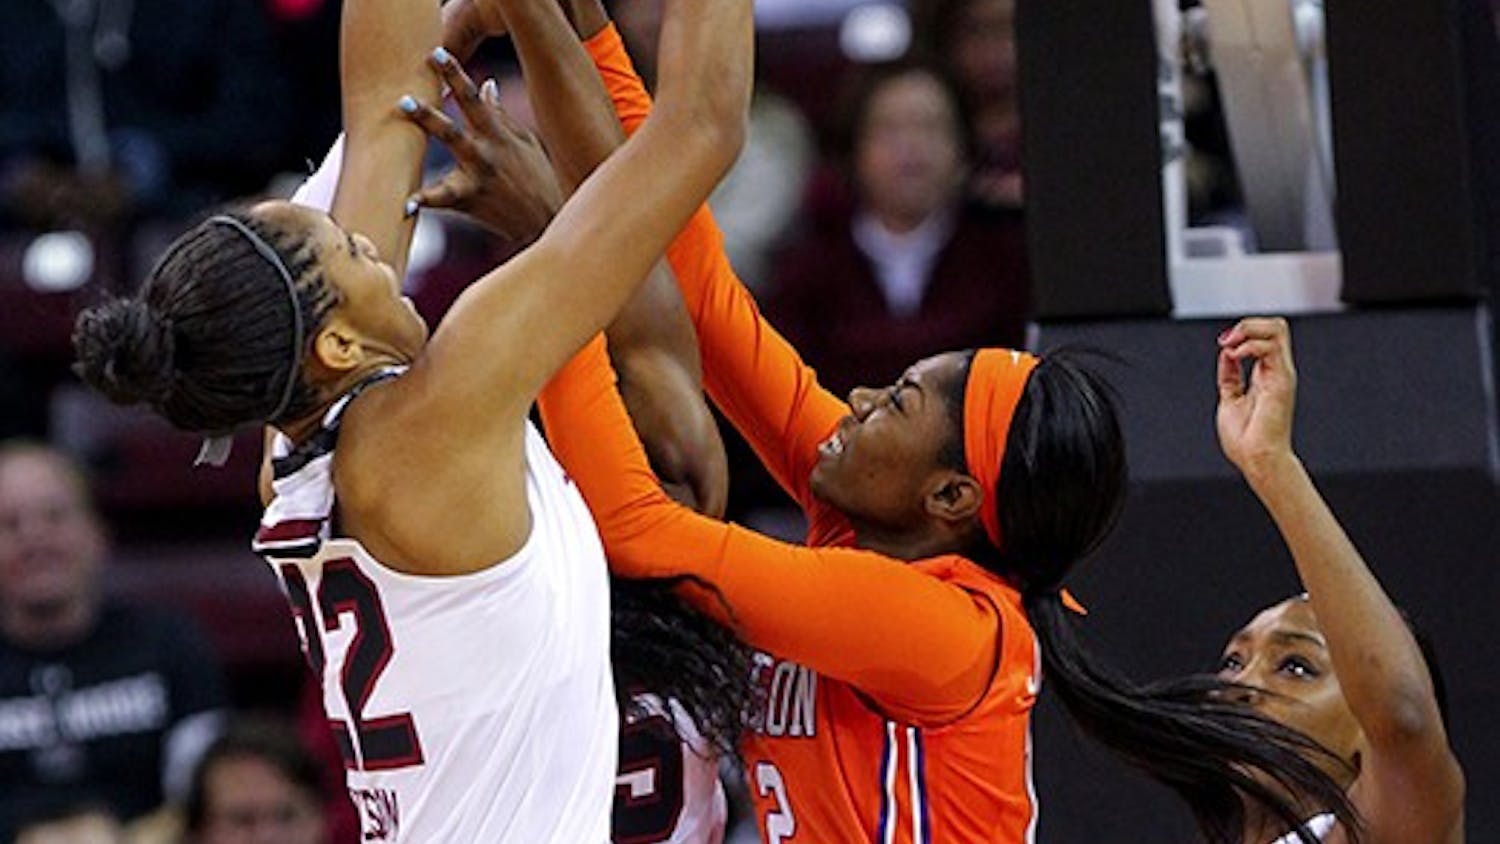 South Carolina&apos;s A&apos;ja Wilson (22) brings down a rebound against Clemson&apos;s MaKayla Johnson (12) during the first half at the Colonial Life Arena in Columbia, S.C., on Thursday, Nov. 20, 2014. (Tracy Glantz/The State/TNS)